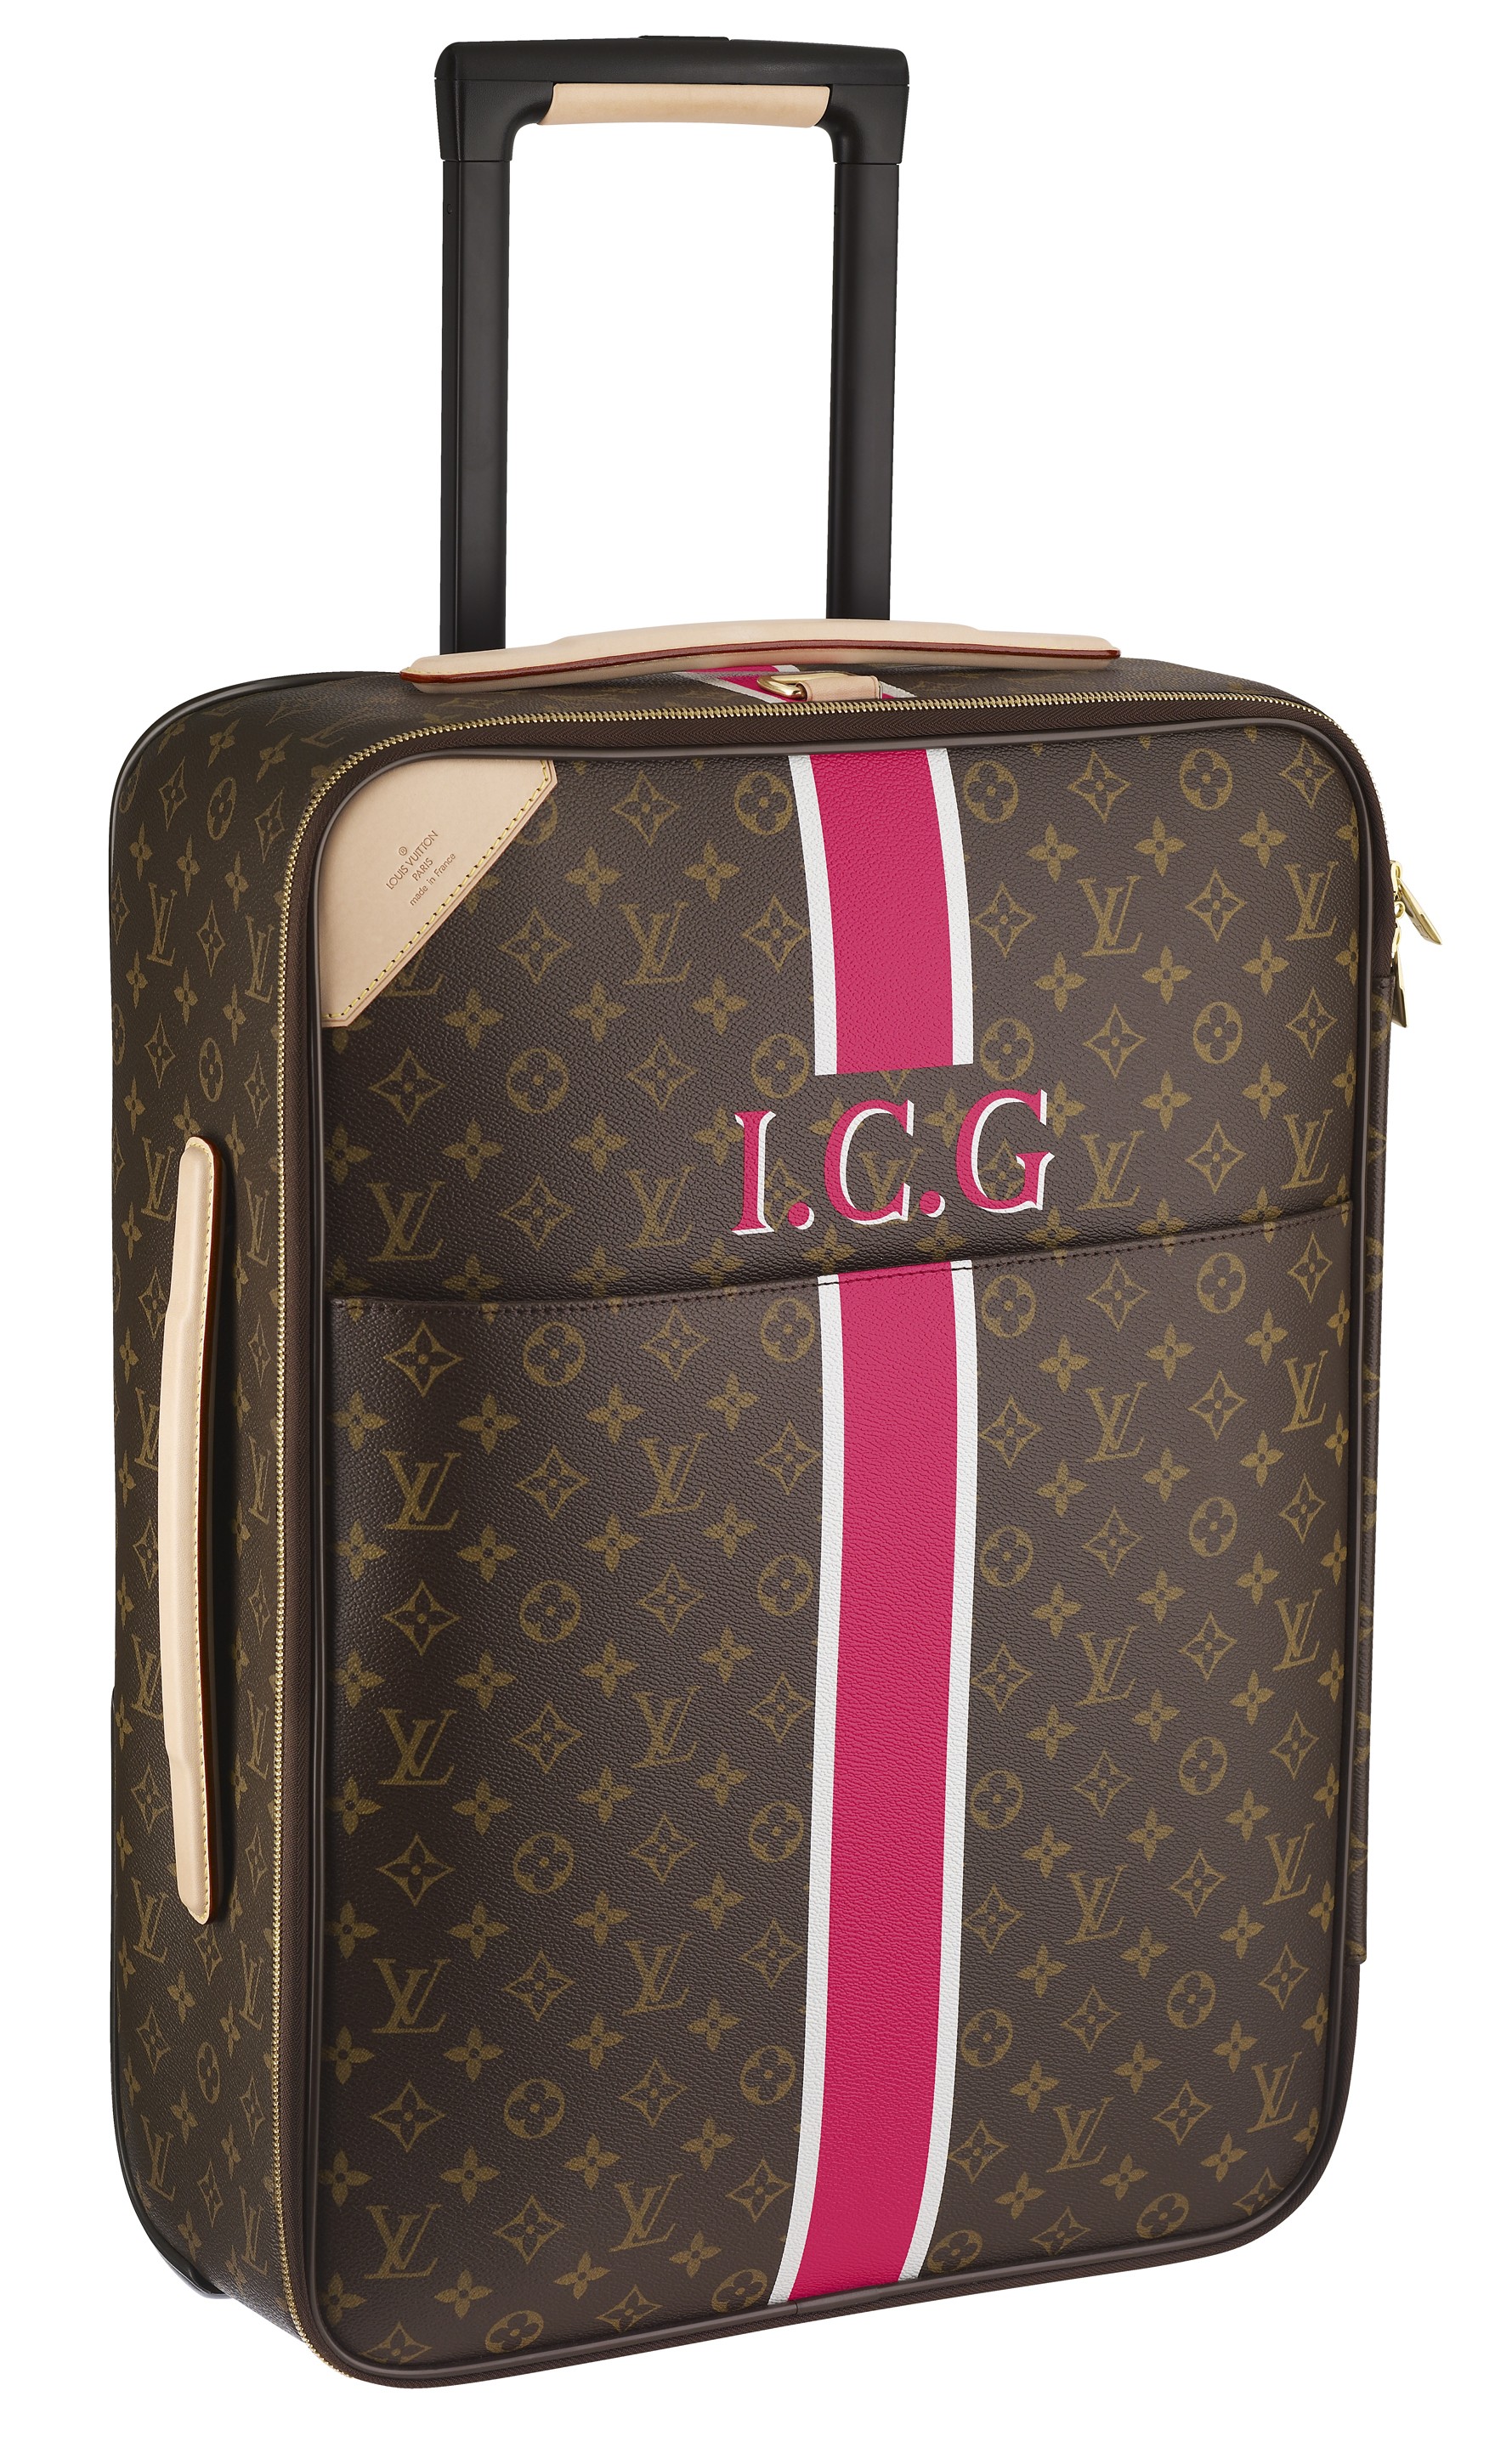 Mon-Monogram Louis Vuitton Neverfull GM with my initials. Think Pink!!! I  to…  Louis vuitton handbags outlet, Louis vuitton handbags neverfull,  Louis vuitton bag